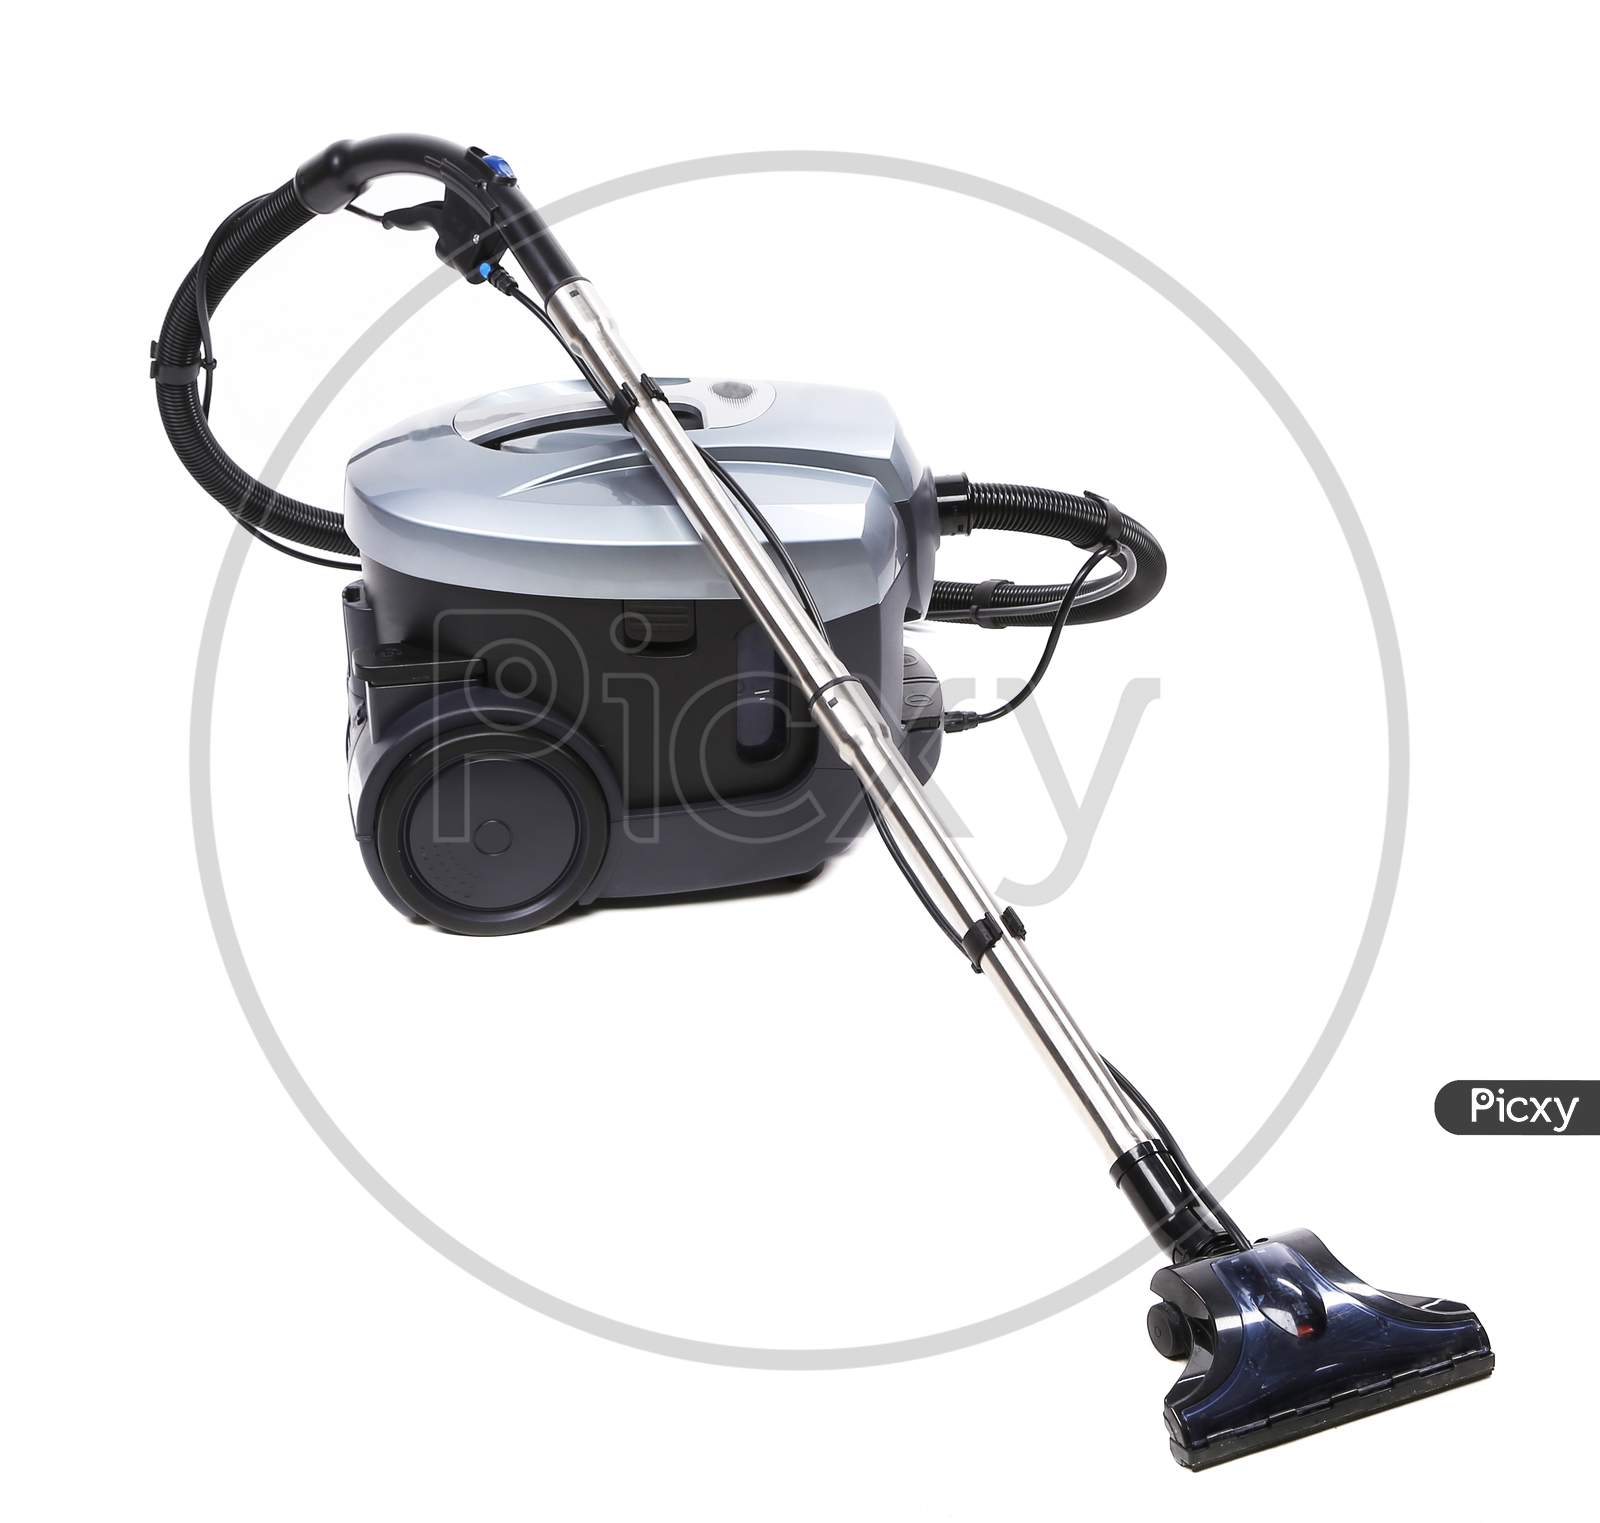 Modern Silver Vacuum Cleaner. Isolated On A White Background.